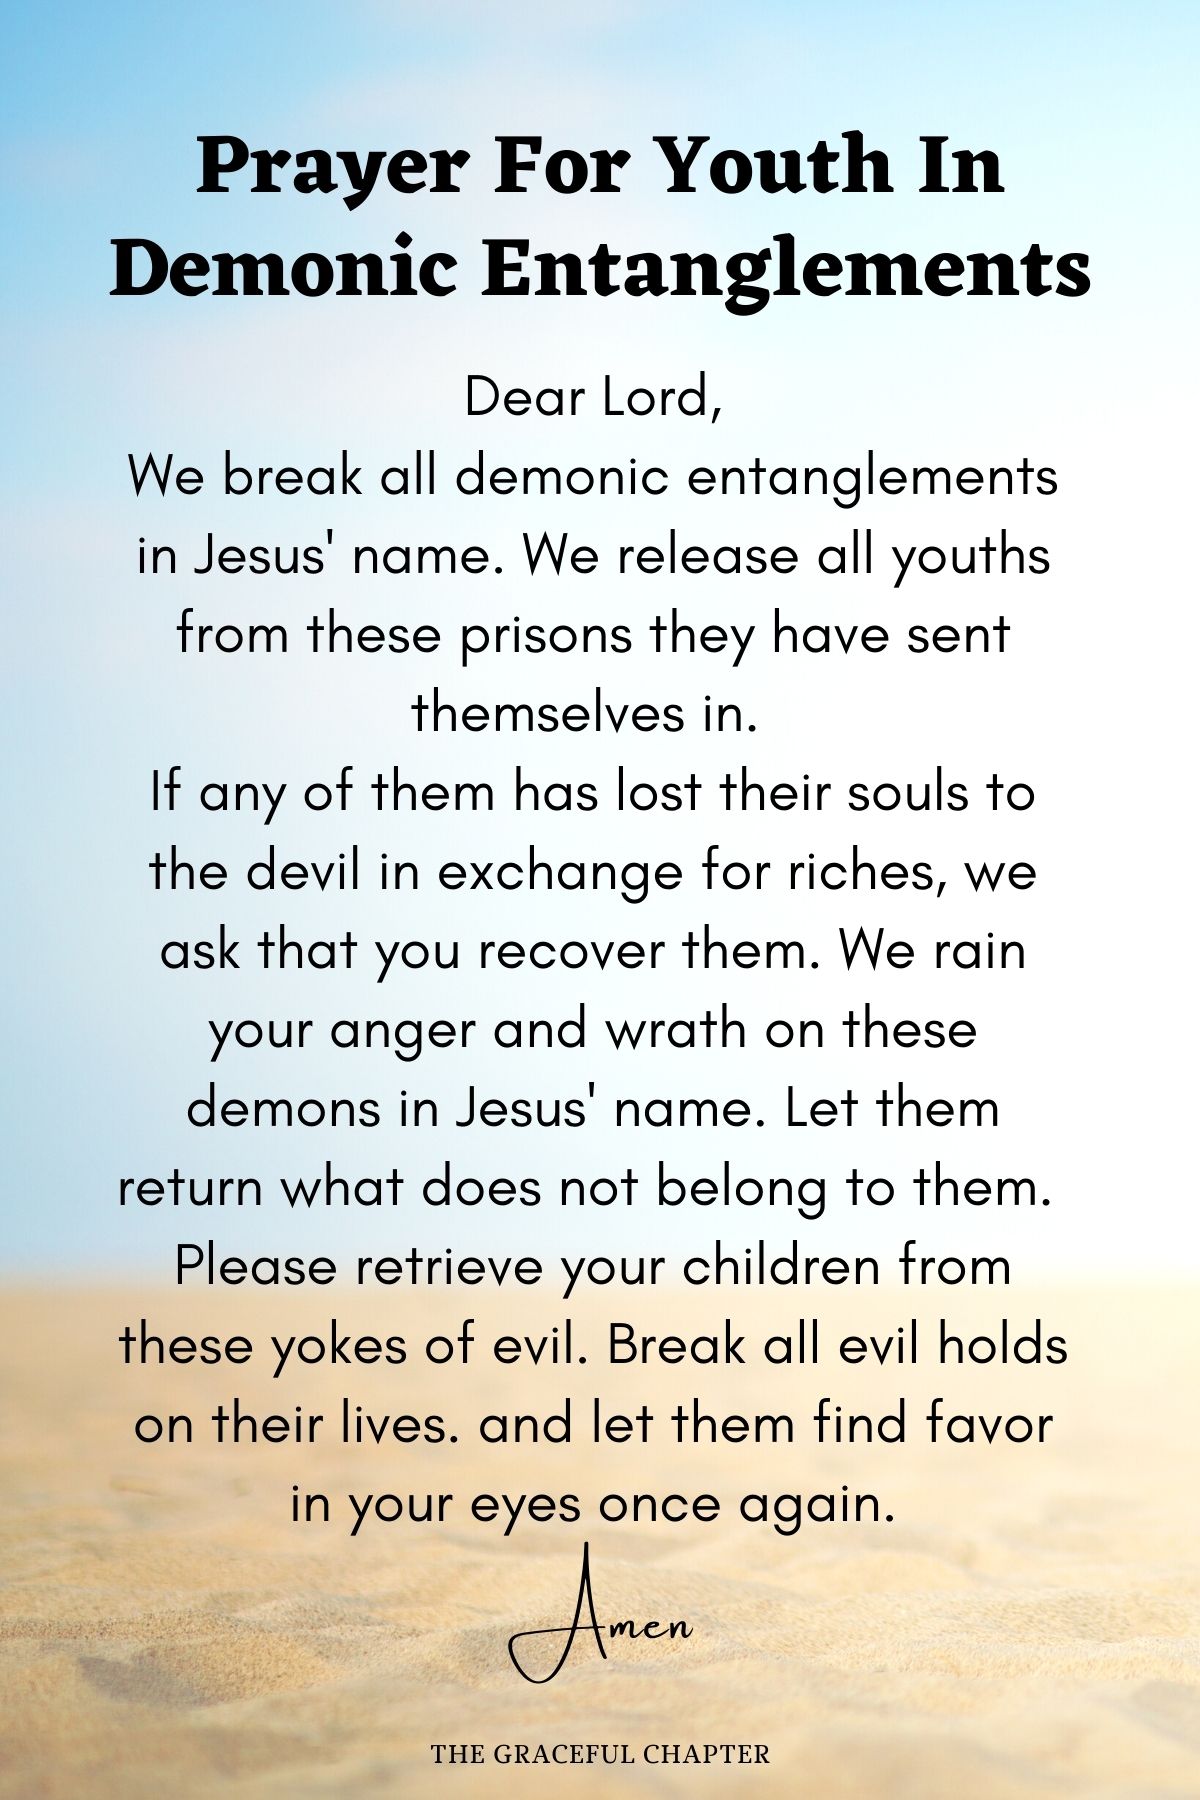 Prayer for youth in demonic entanglements